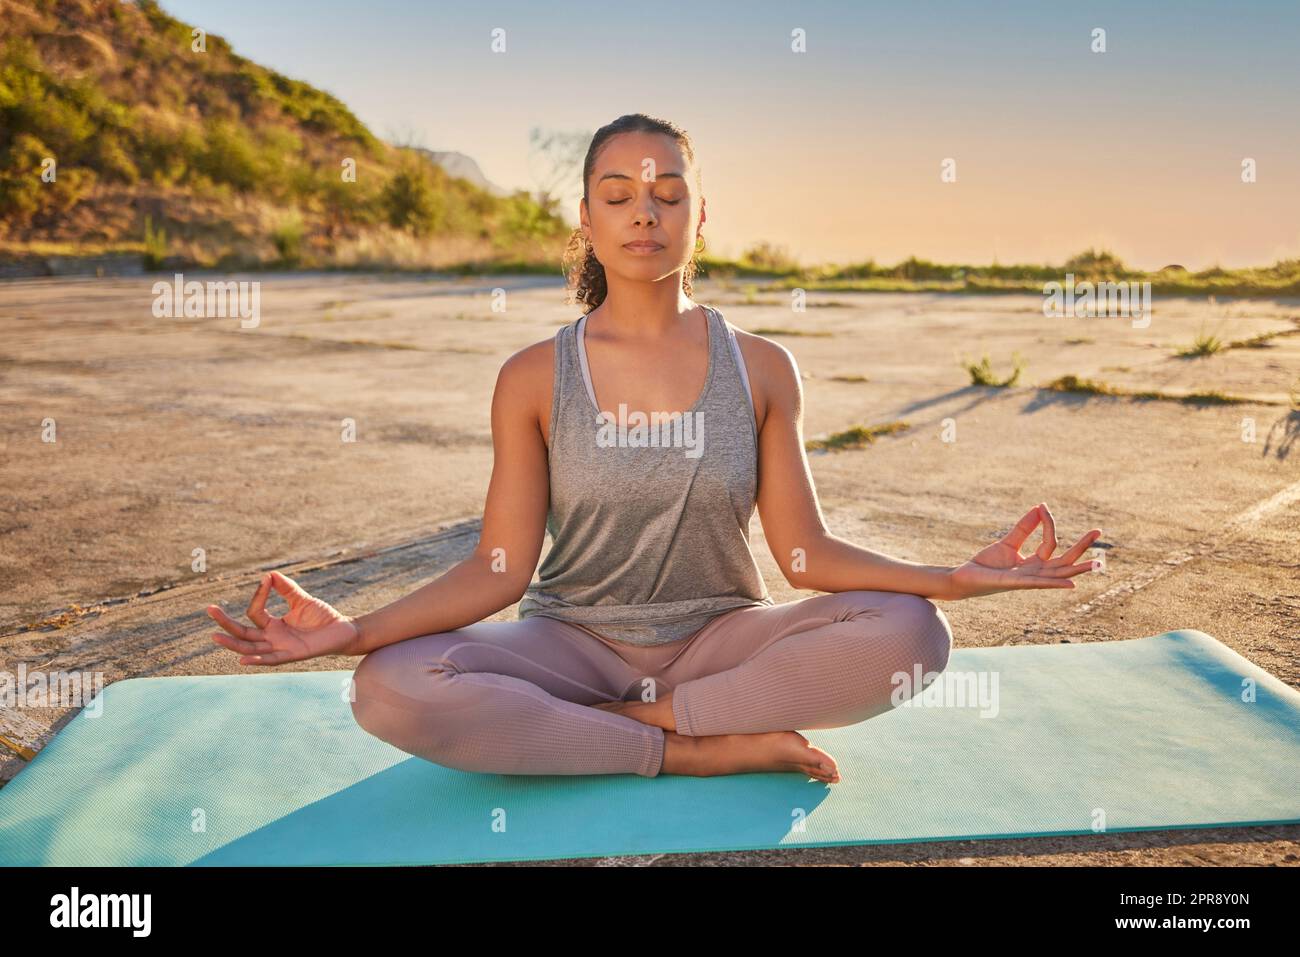 Full length yoga woman meditating with legs crossed for outdoor practice in remote nature. Mixed race mindful active person sitting alone and balancing for mental health. Young hispanic serene and zen Stock Photo